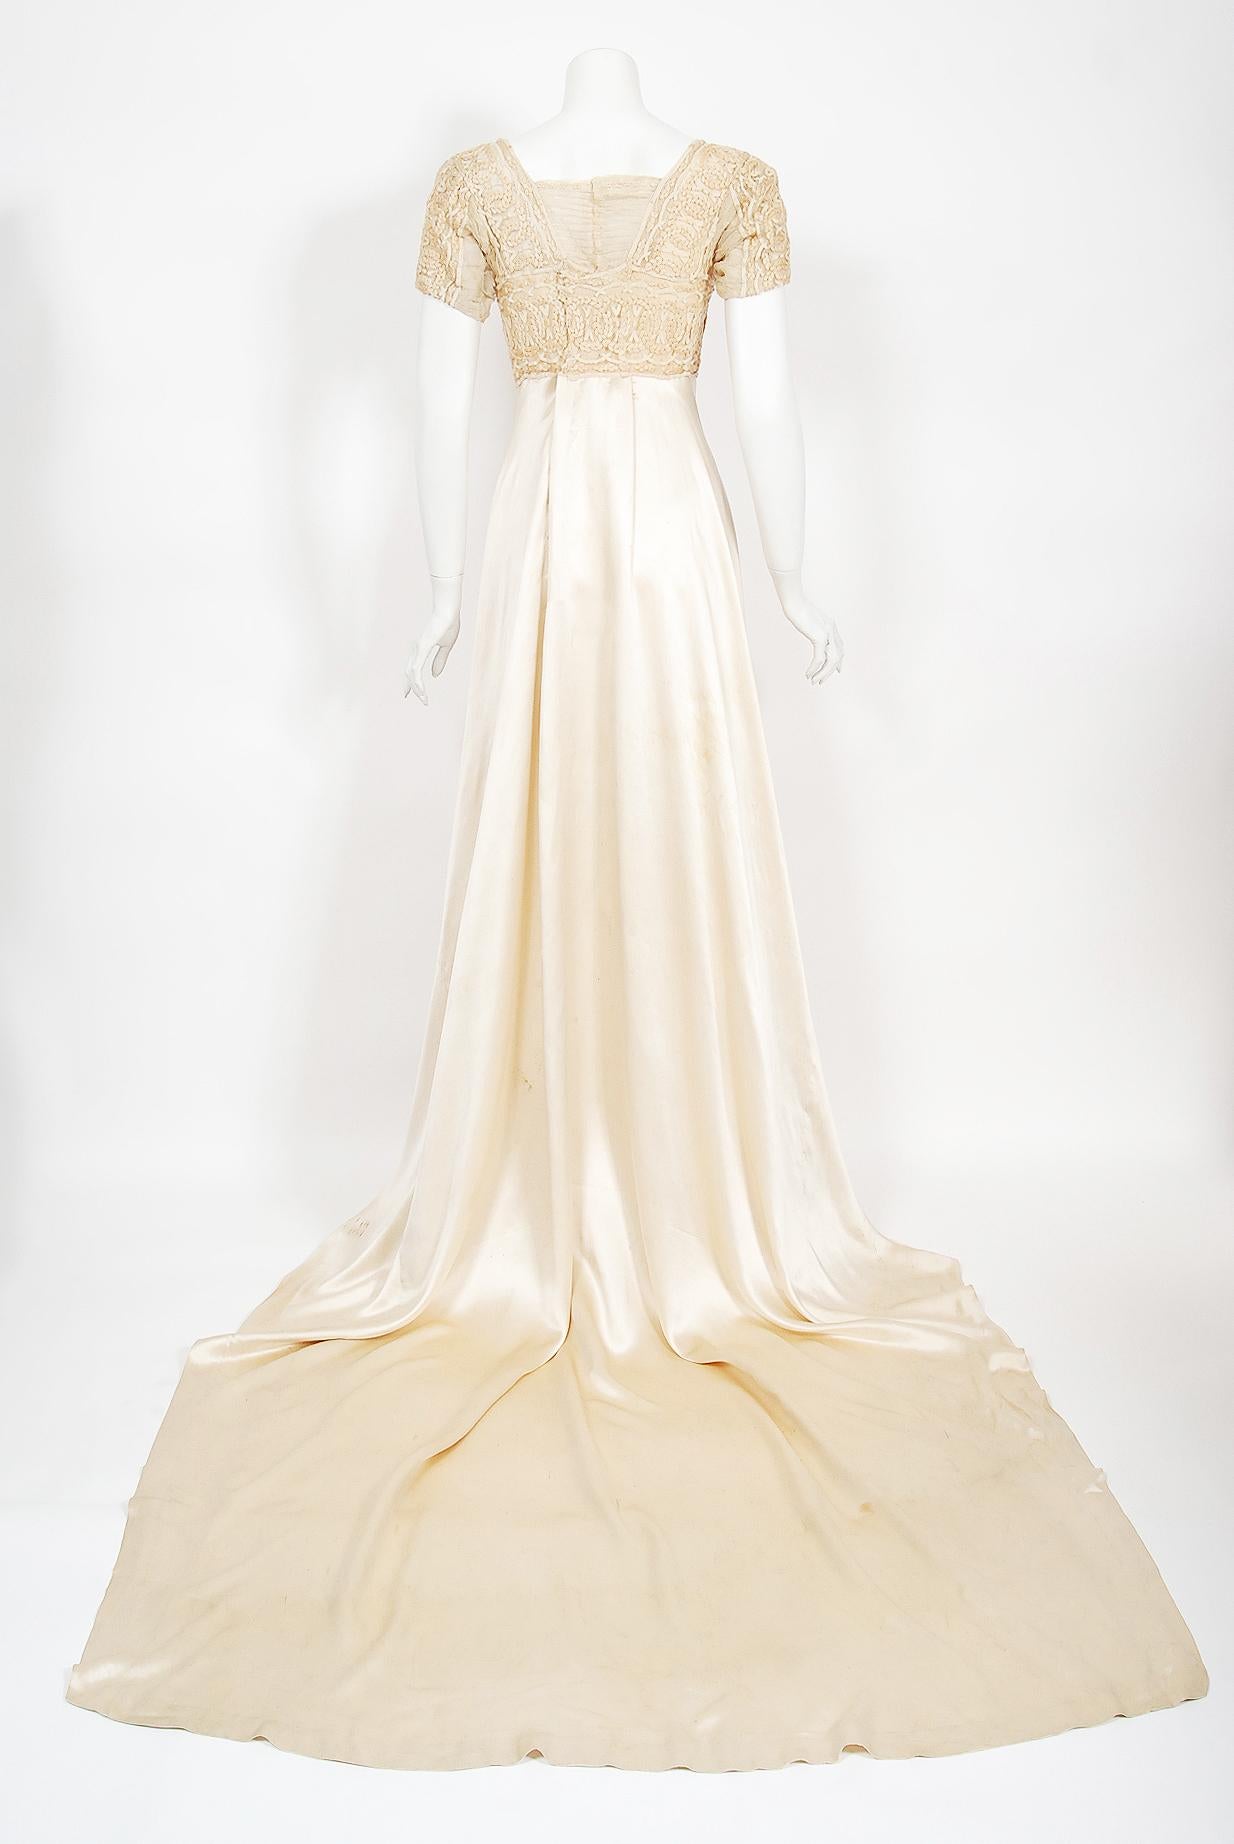 Vintage 1910s Ivory Crème Embroidered Net-Lace & Silk Satin Trained Bridal Gown  For Sale 6